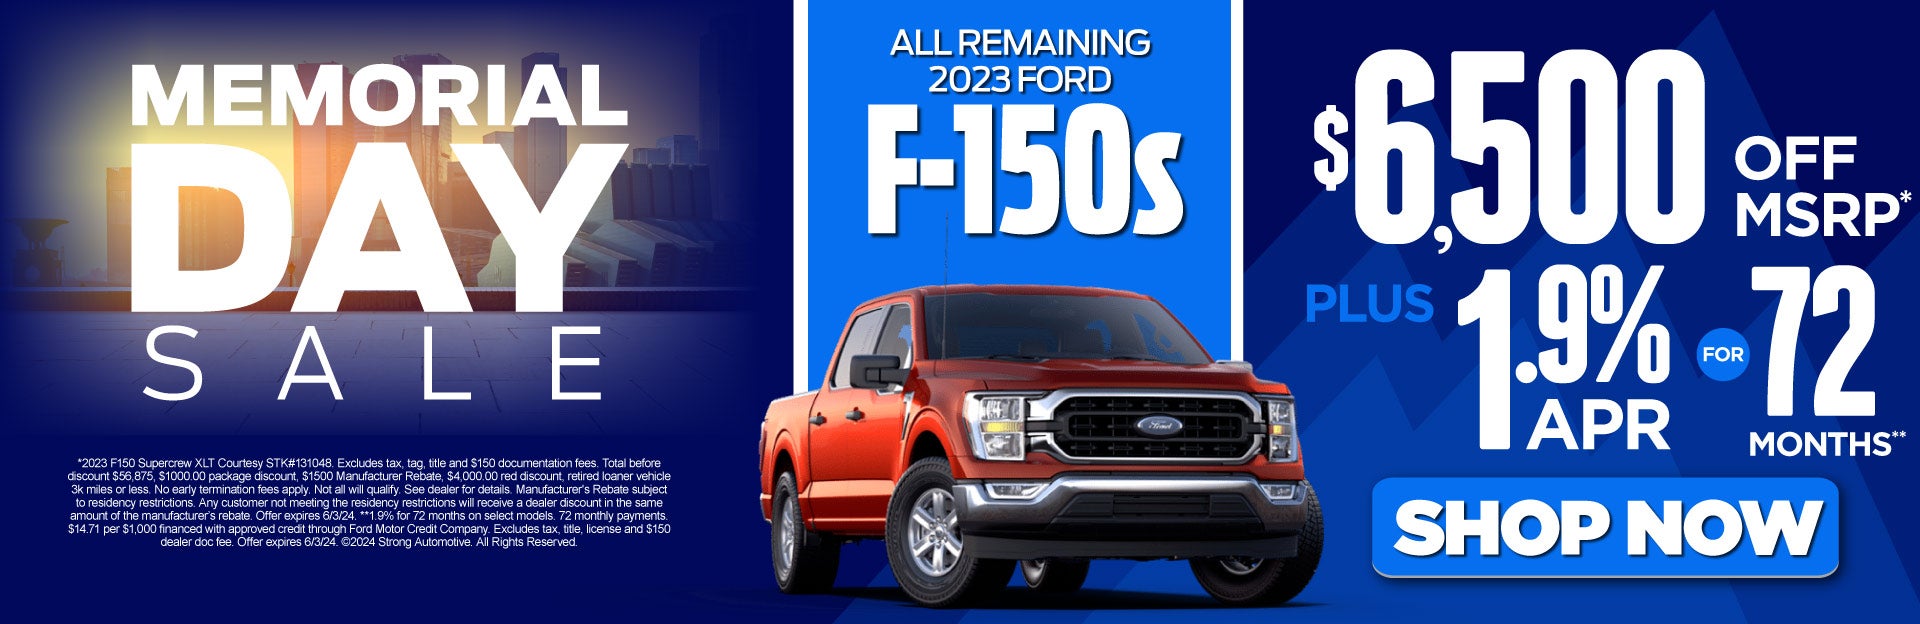 2023 f-150s $6,500 oss msrp | shop now